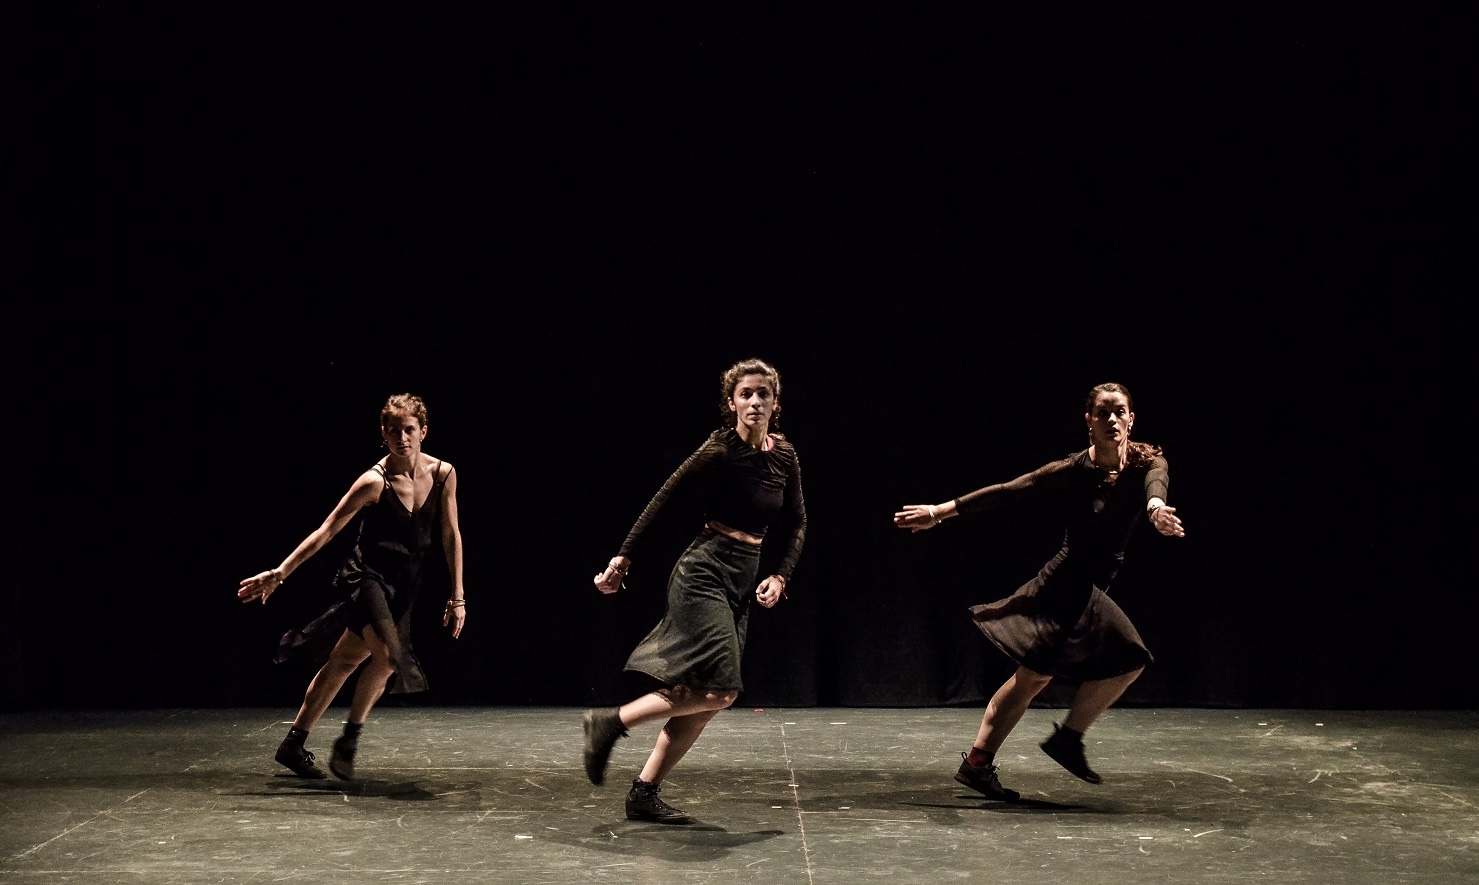 Selcouth Dance Theater Company. Photo courtesy of the artists